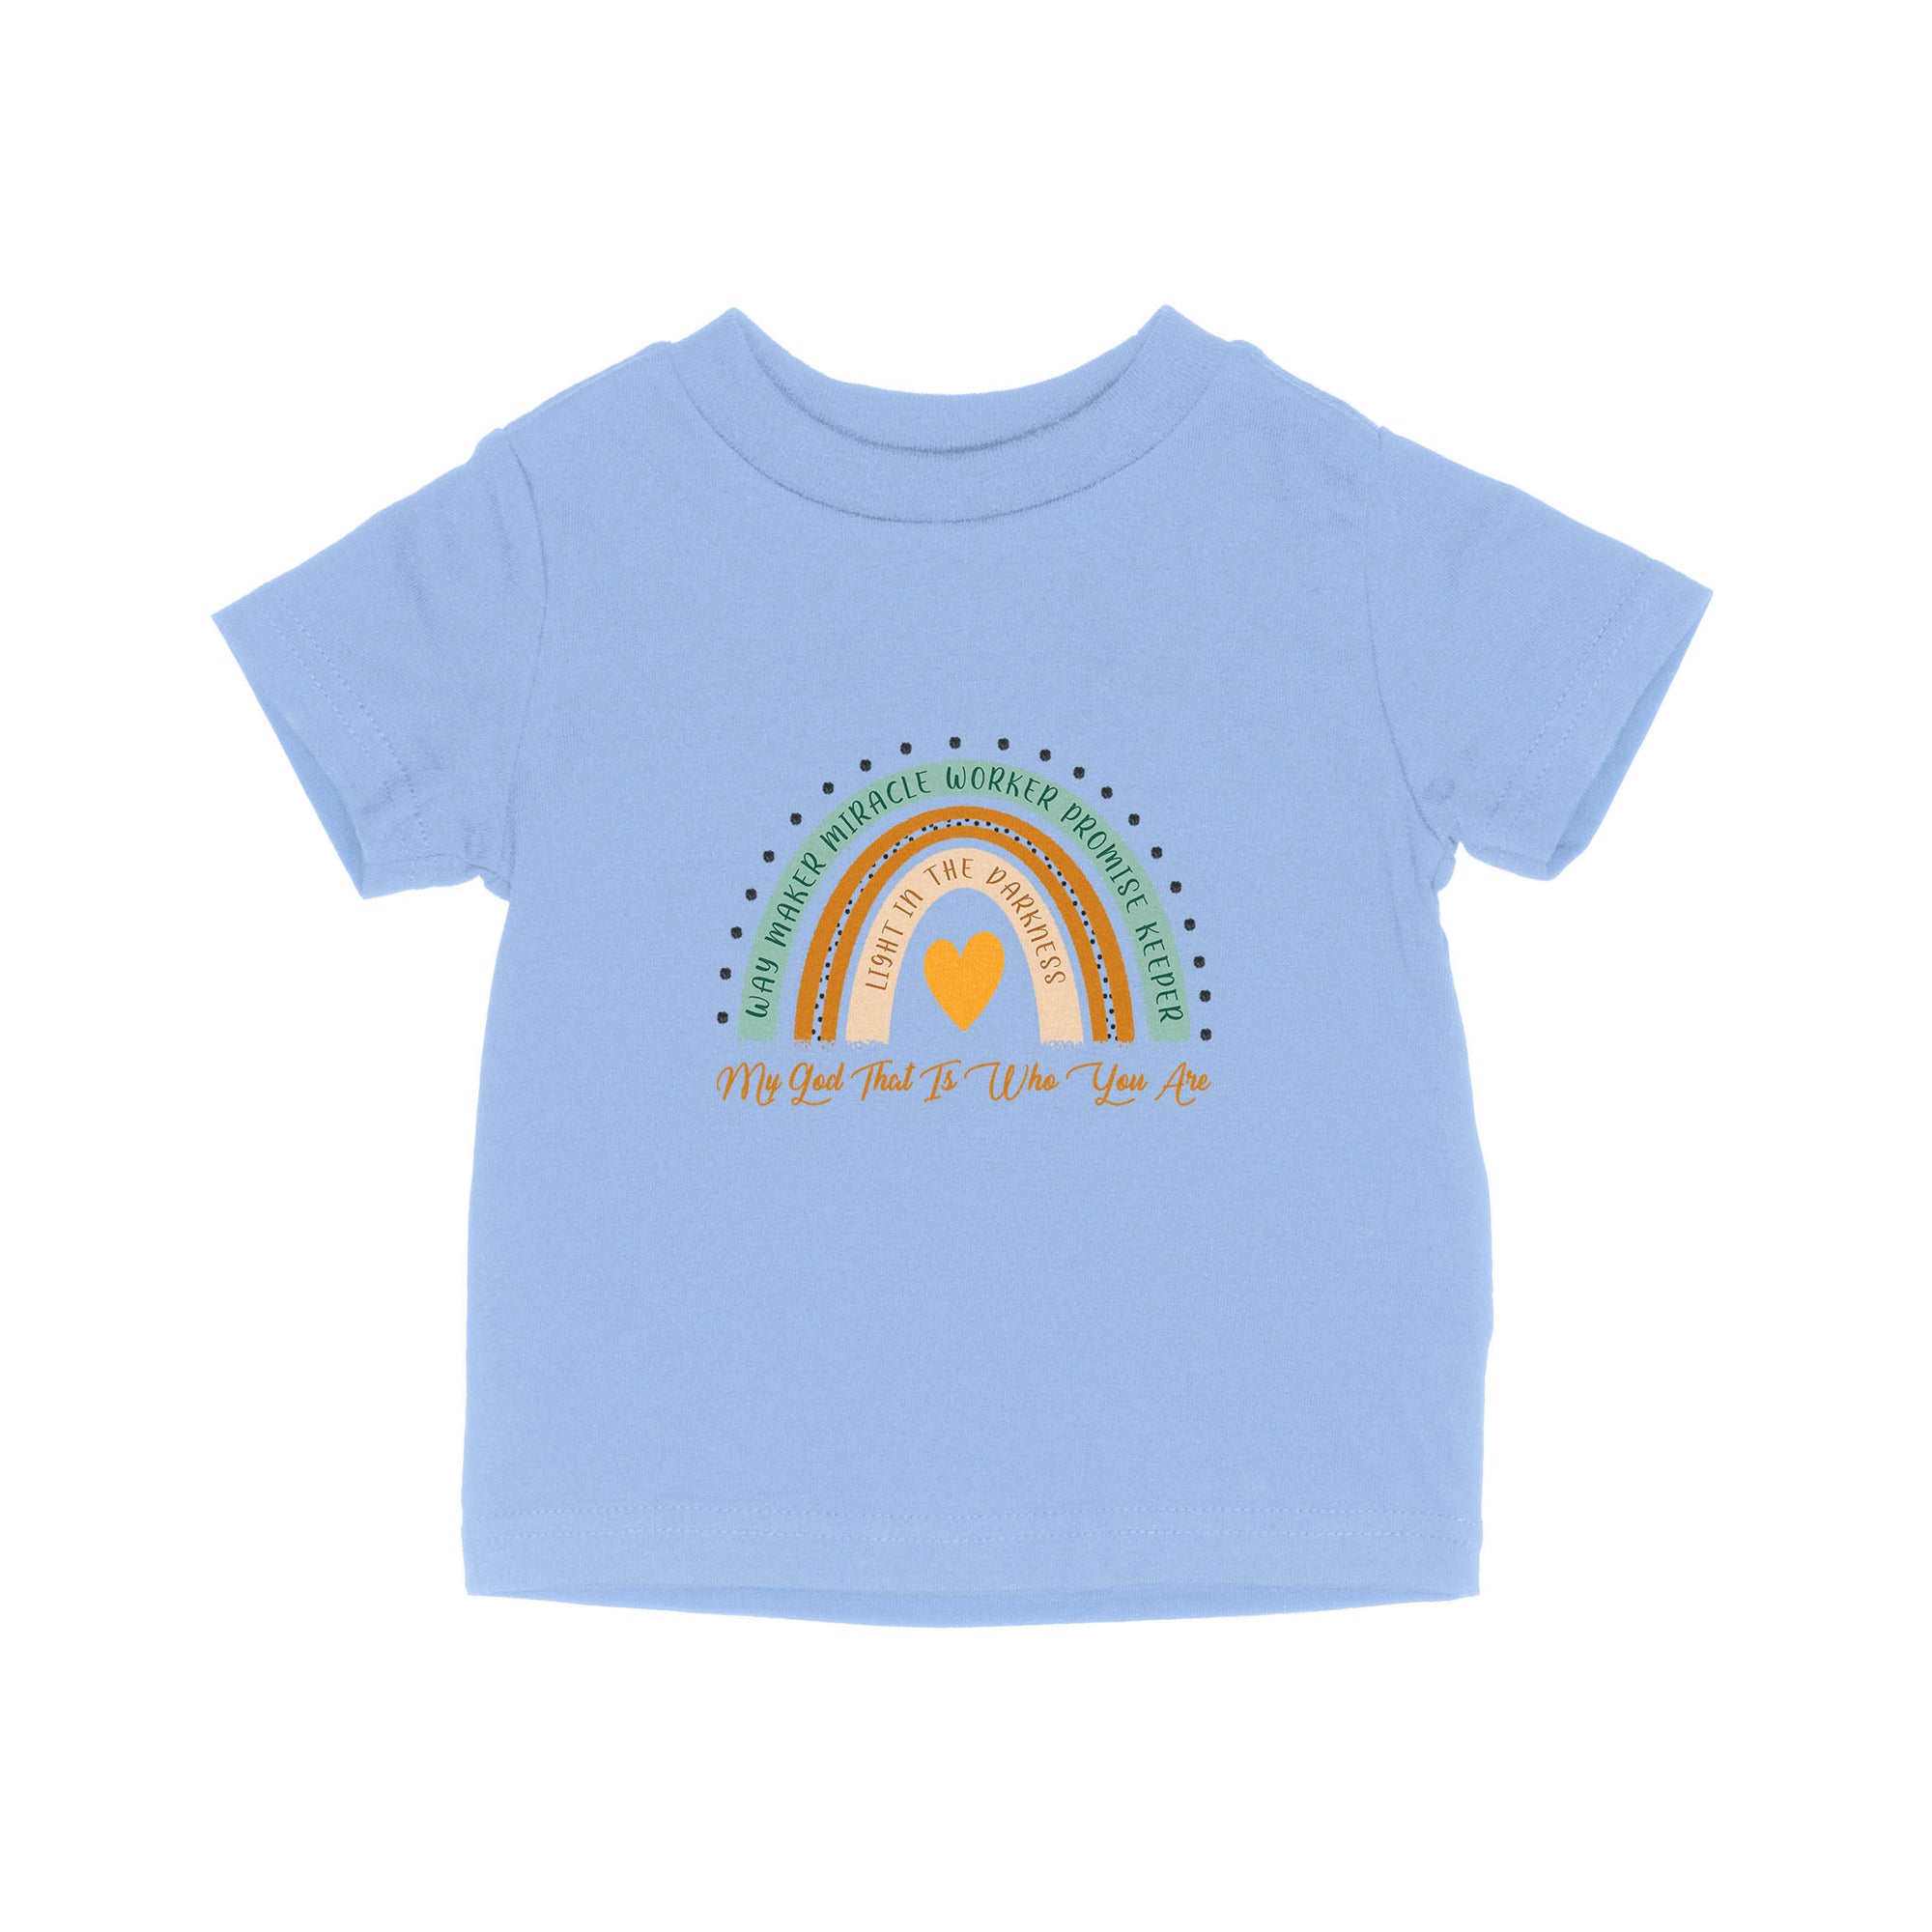 Way Maker Miracle Worker Promise Keeper Light In The Darkness - Baby T-Shirt